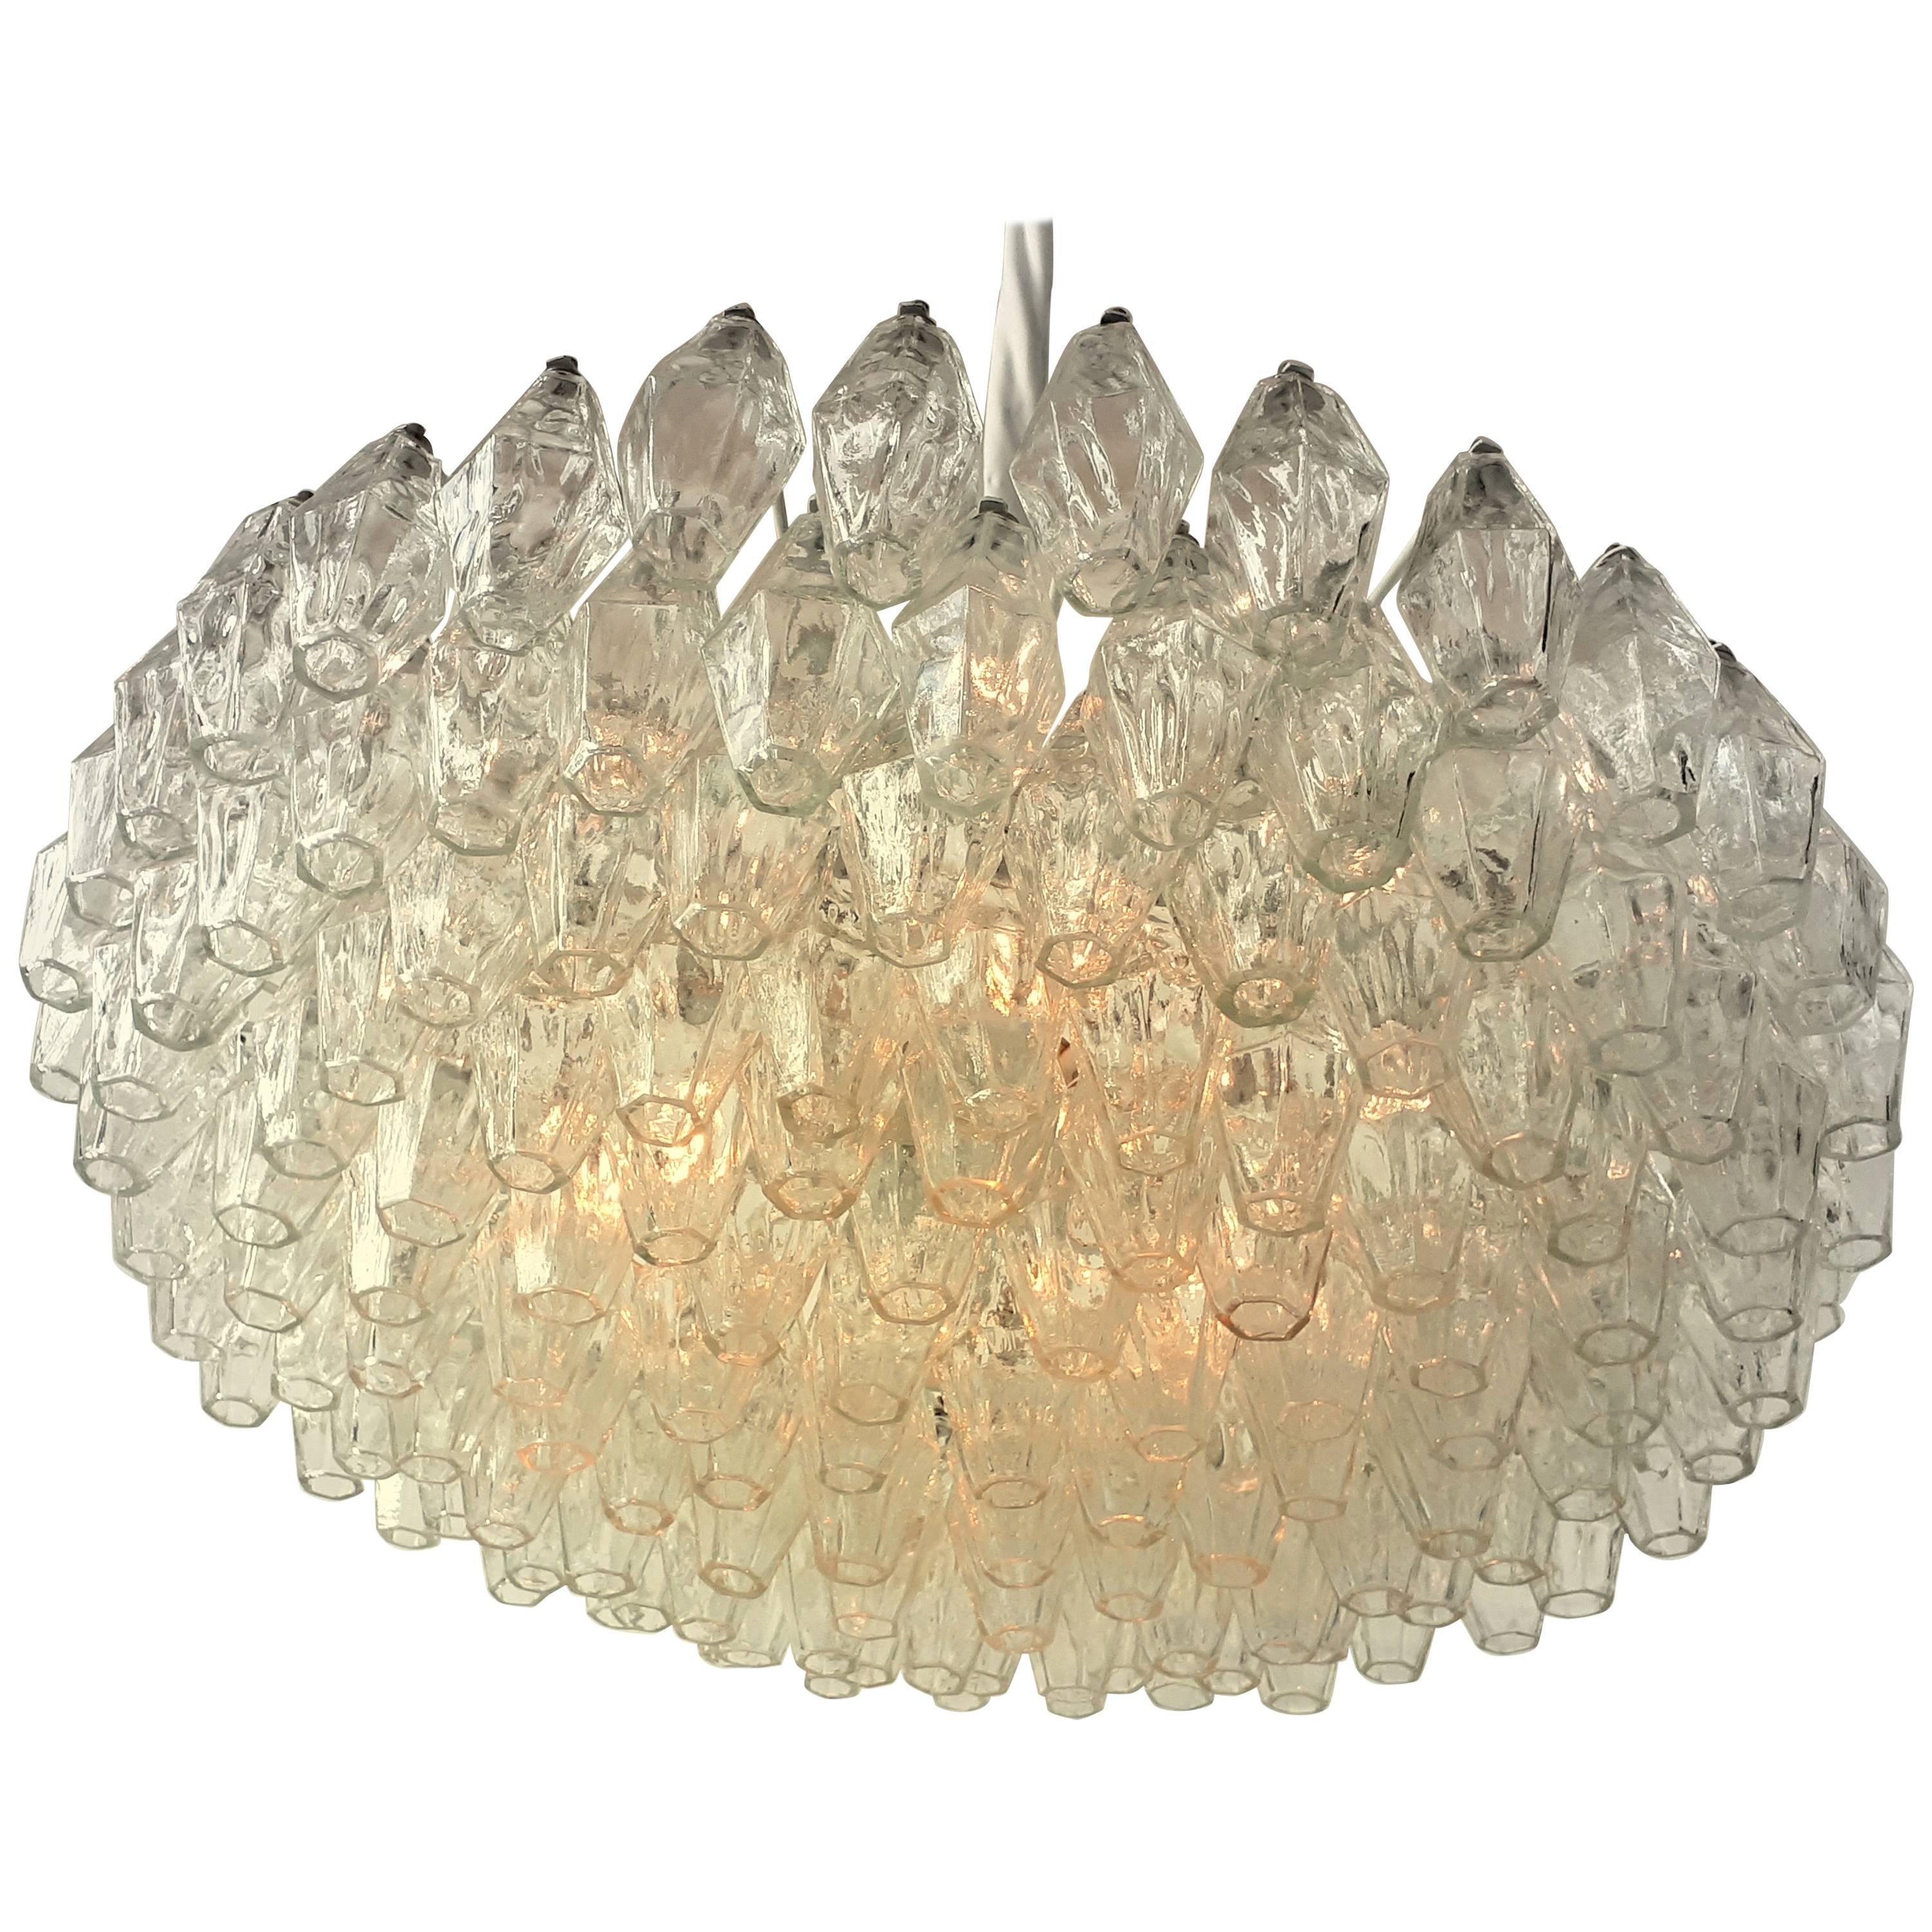 Original Signed Venini Polyhedral Glass  Chandelier , 1960s , Italy